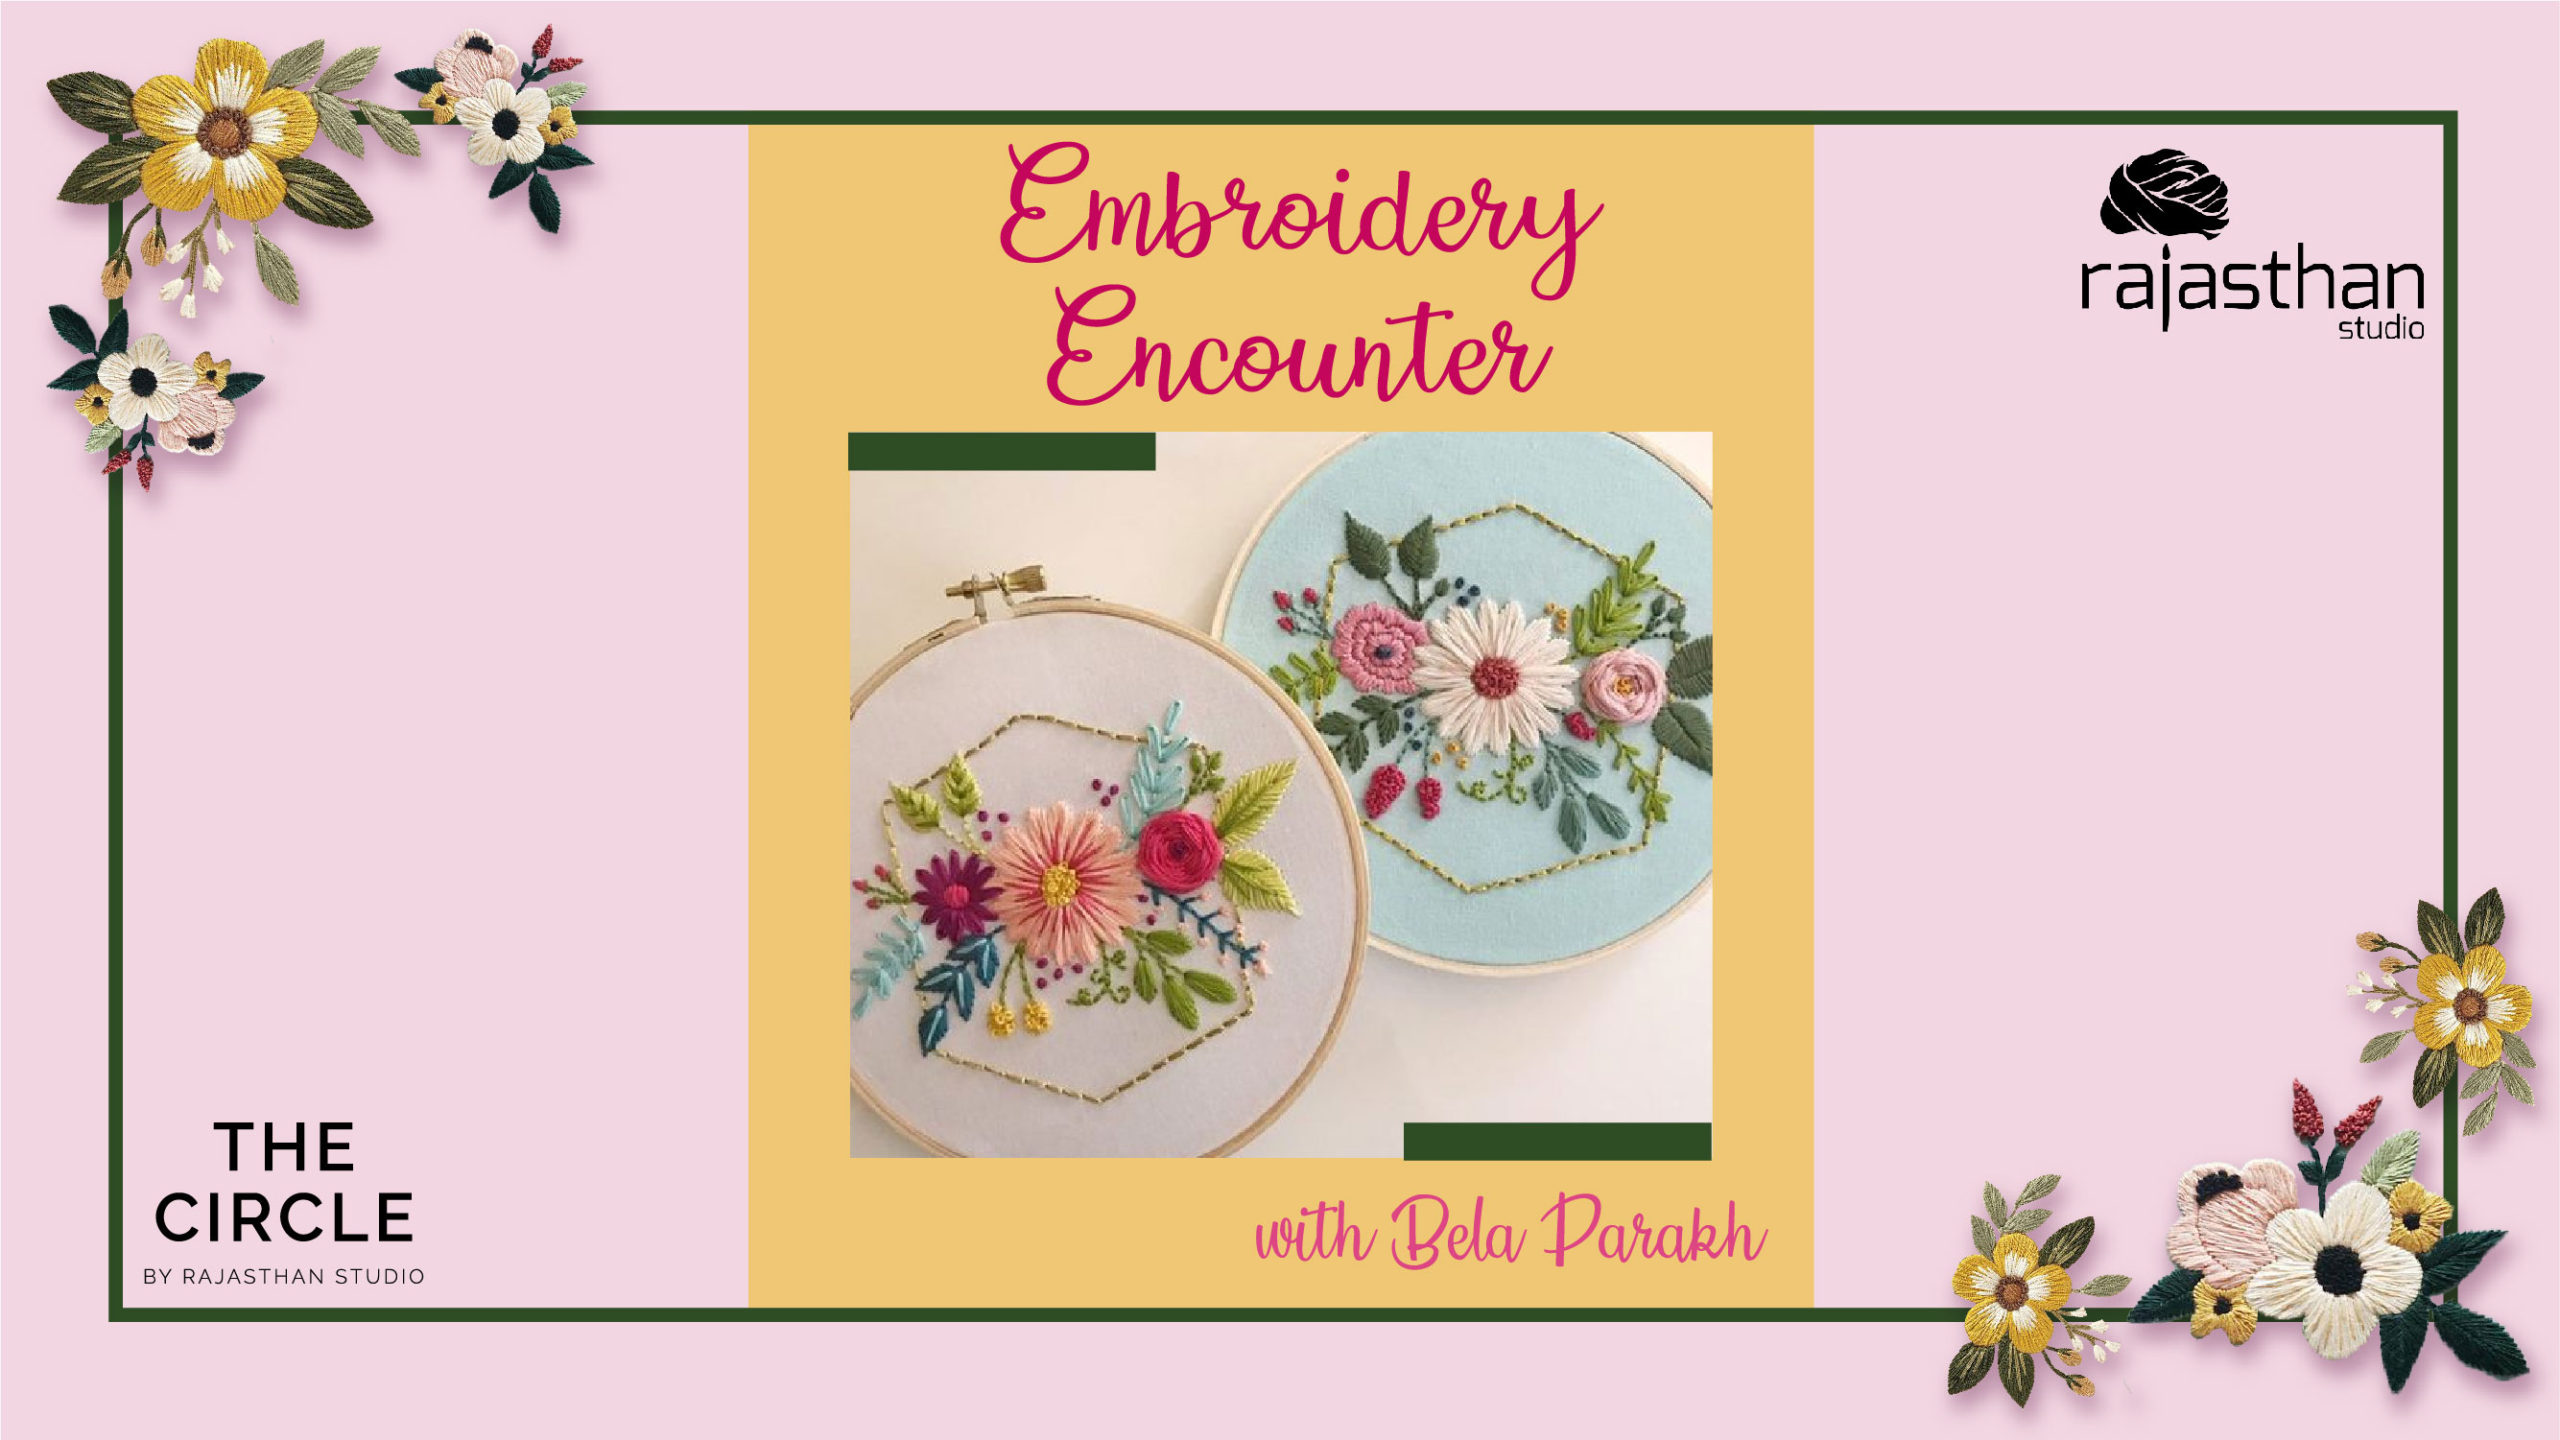 Embroidery Encounter with Bela Parakh